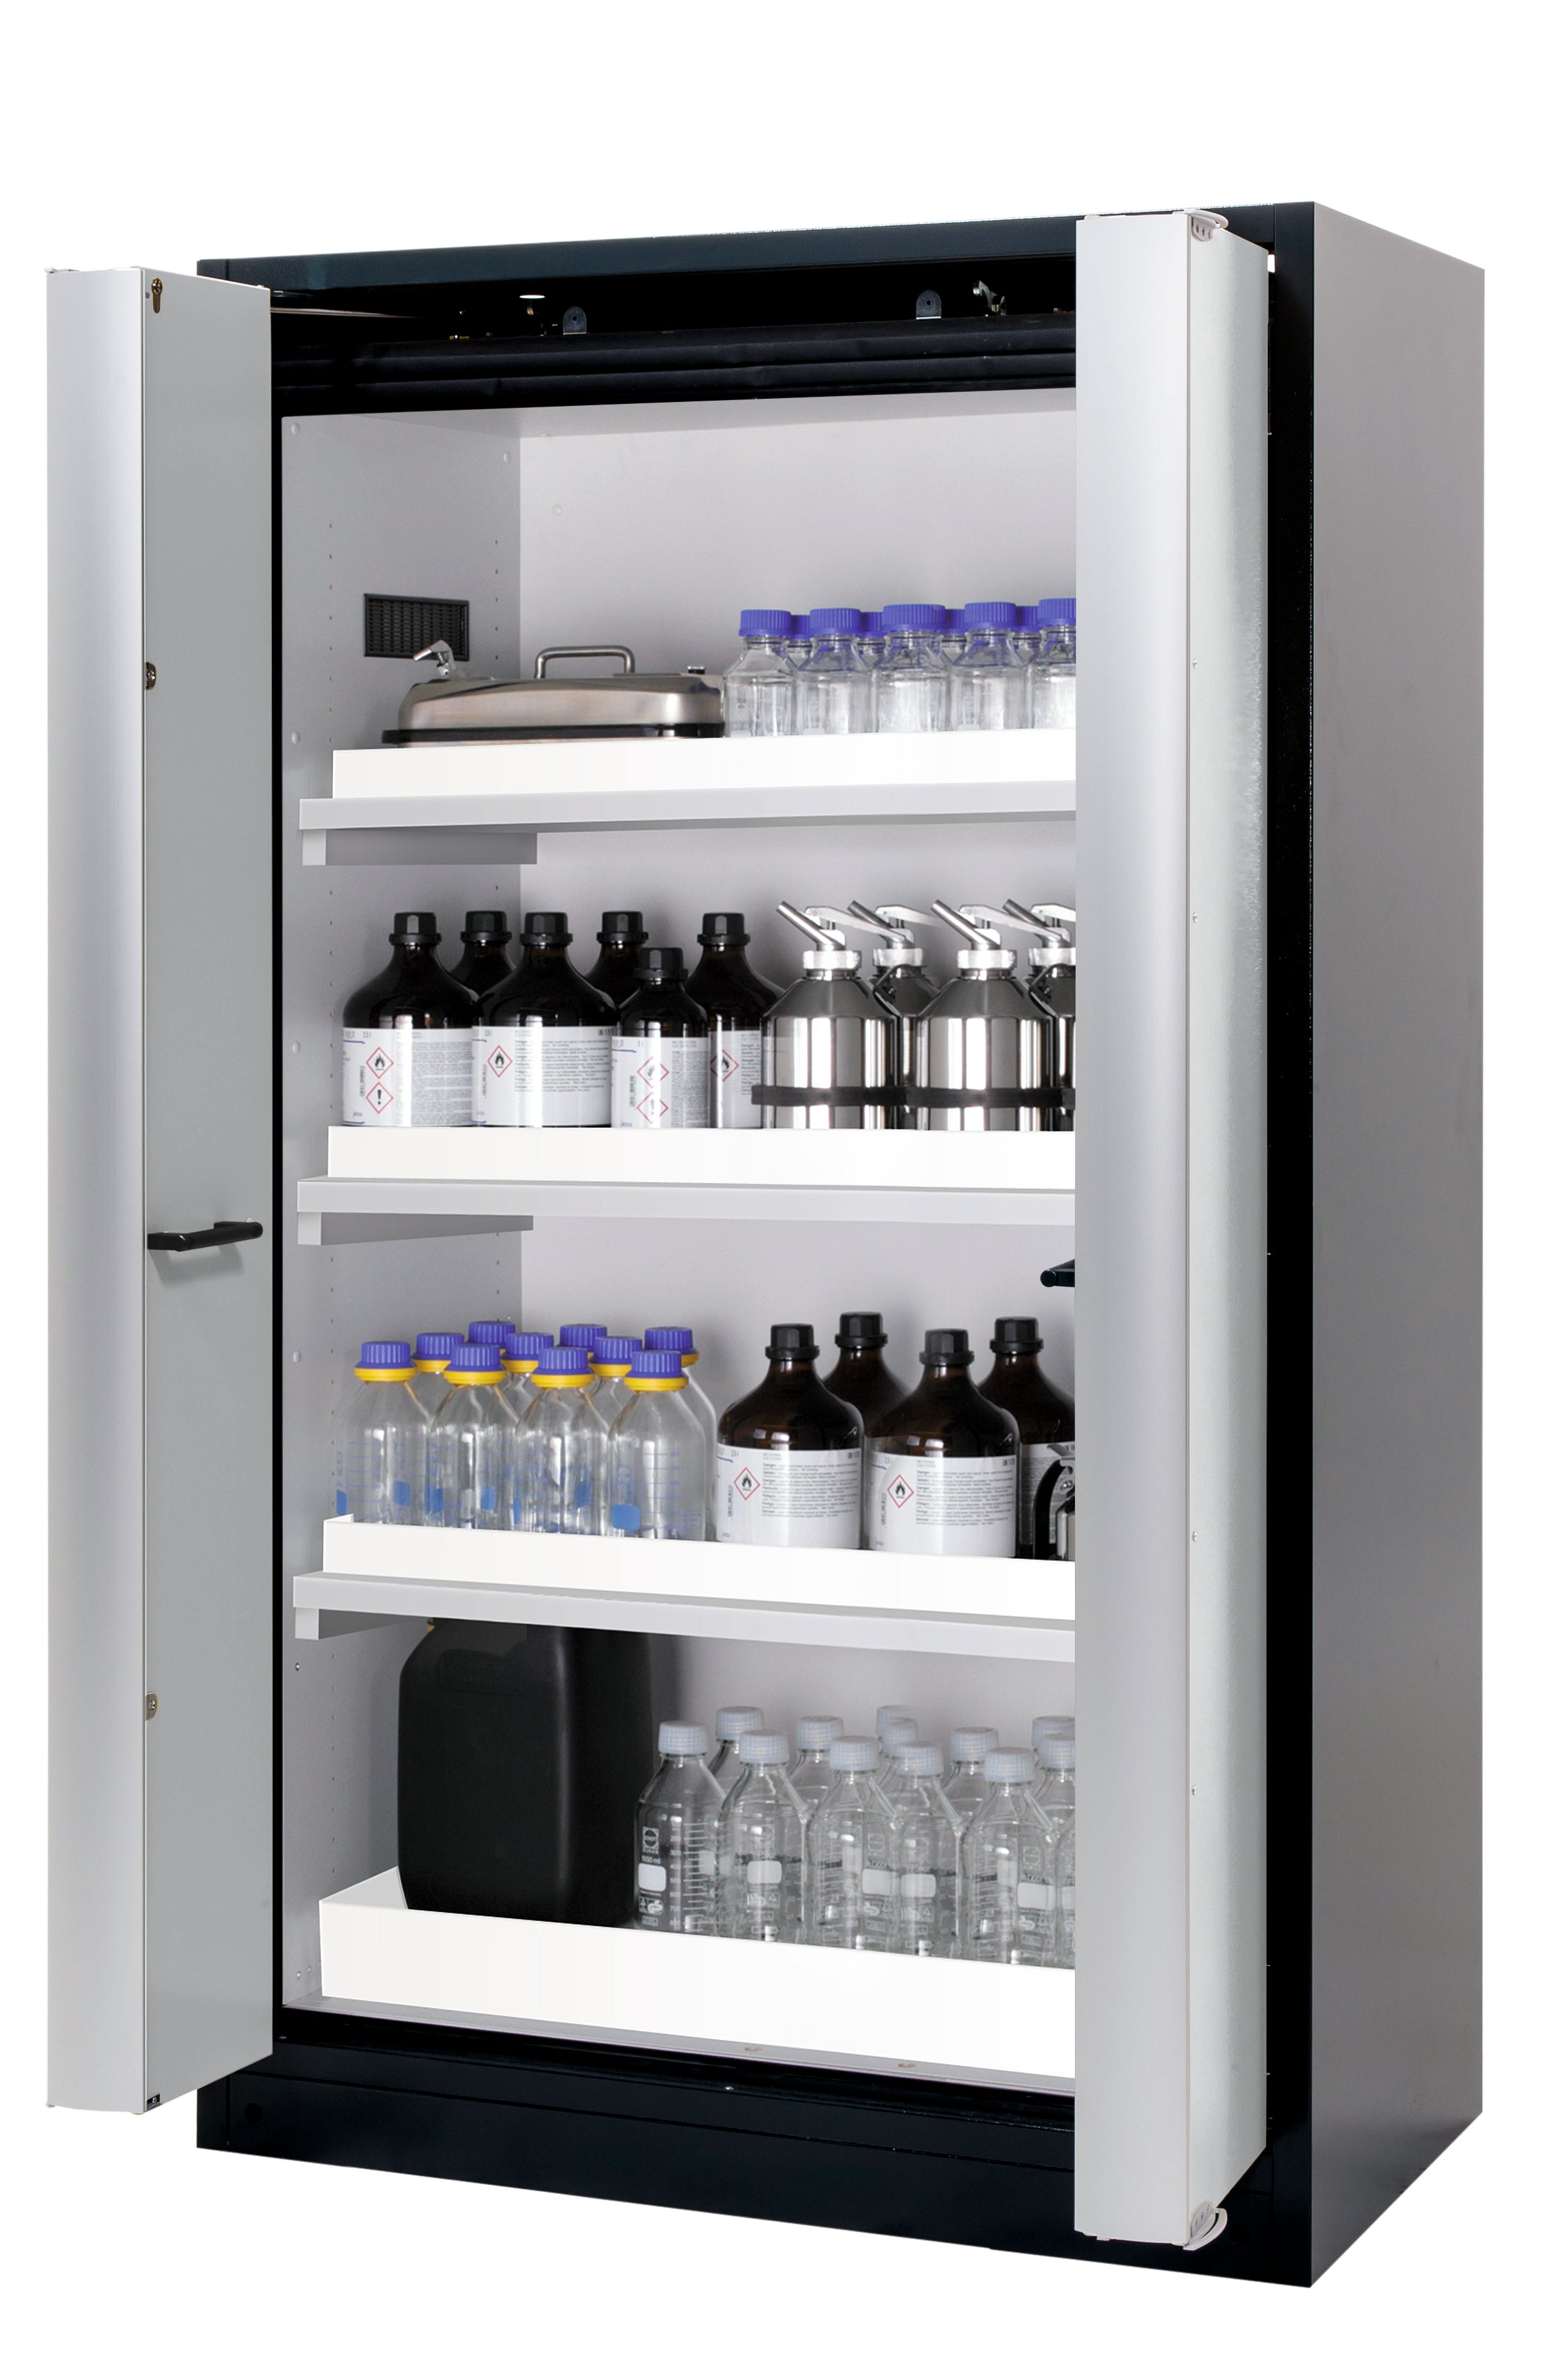 Type 90 safety cabinet Q-PHOENIX-90 model Q90.195.120.FD in light gray RAL 7035 with 3x standard tray base (polypropylene)